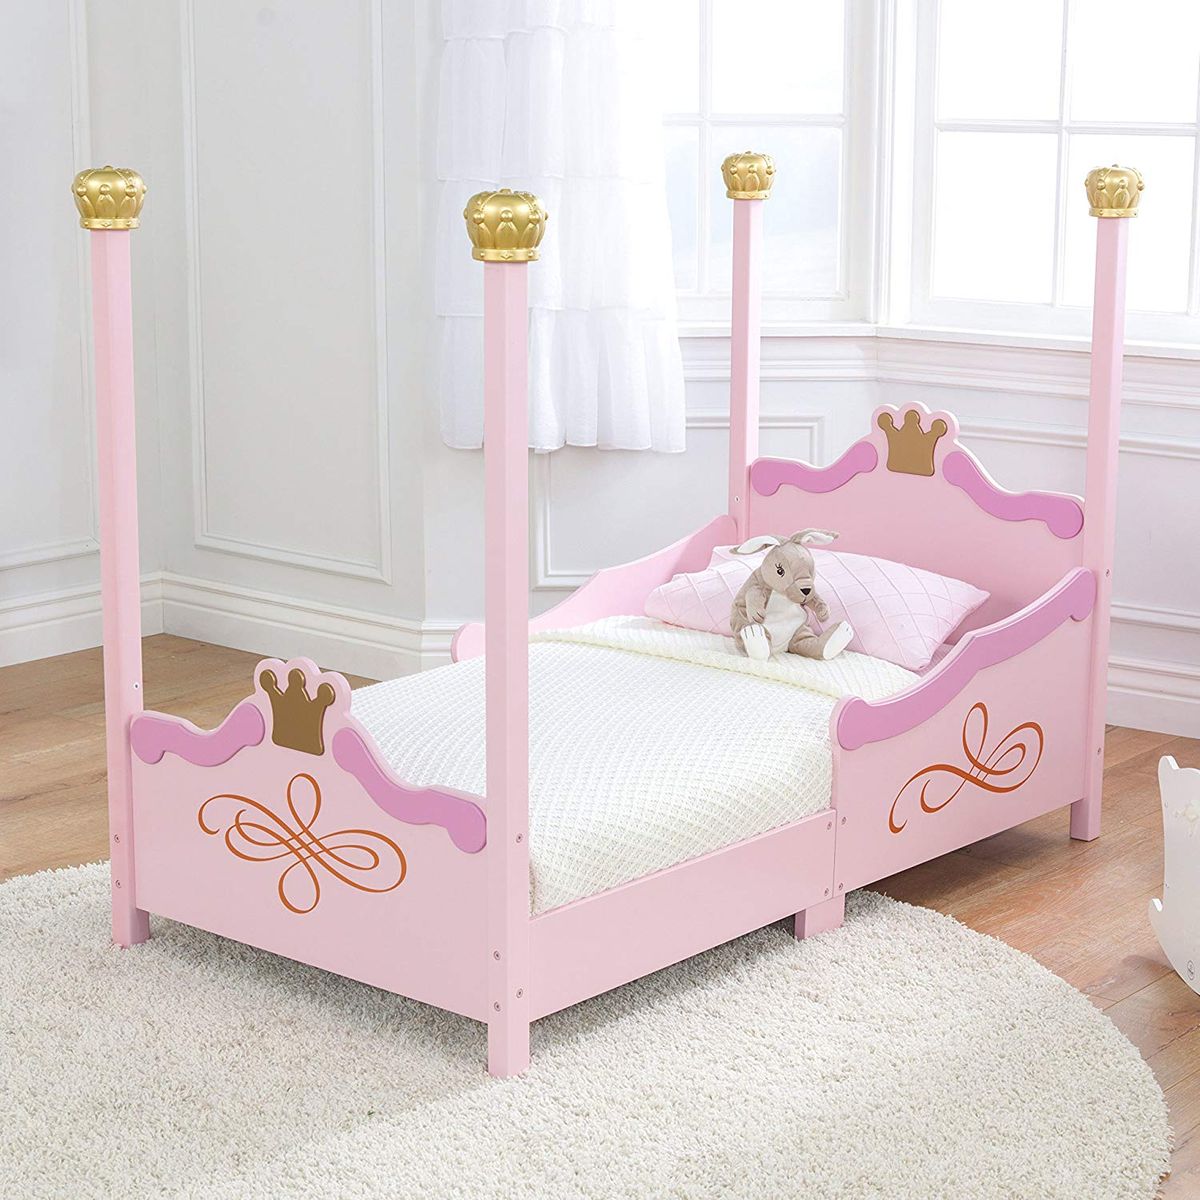 youth beds for toddlers